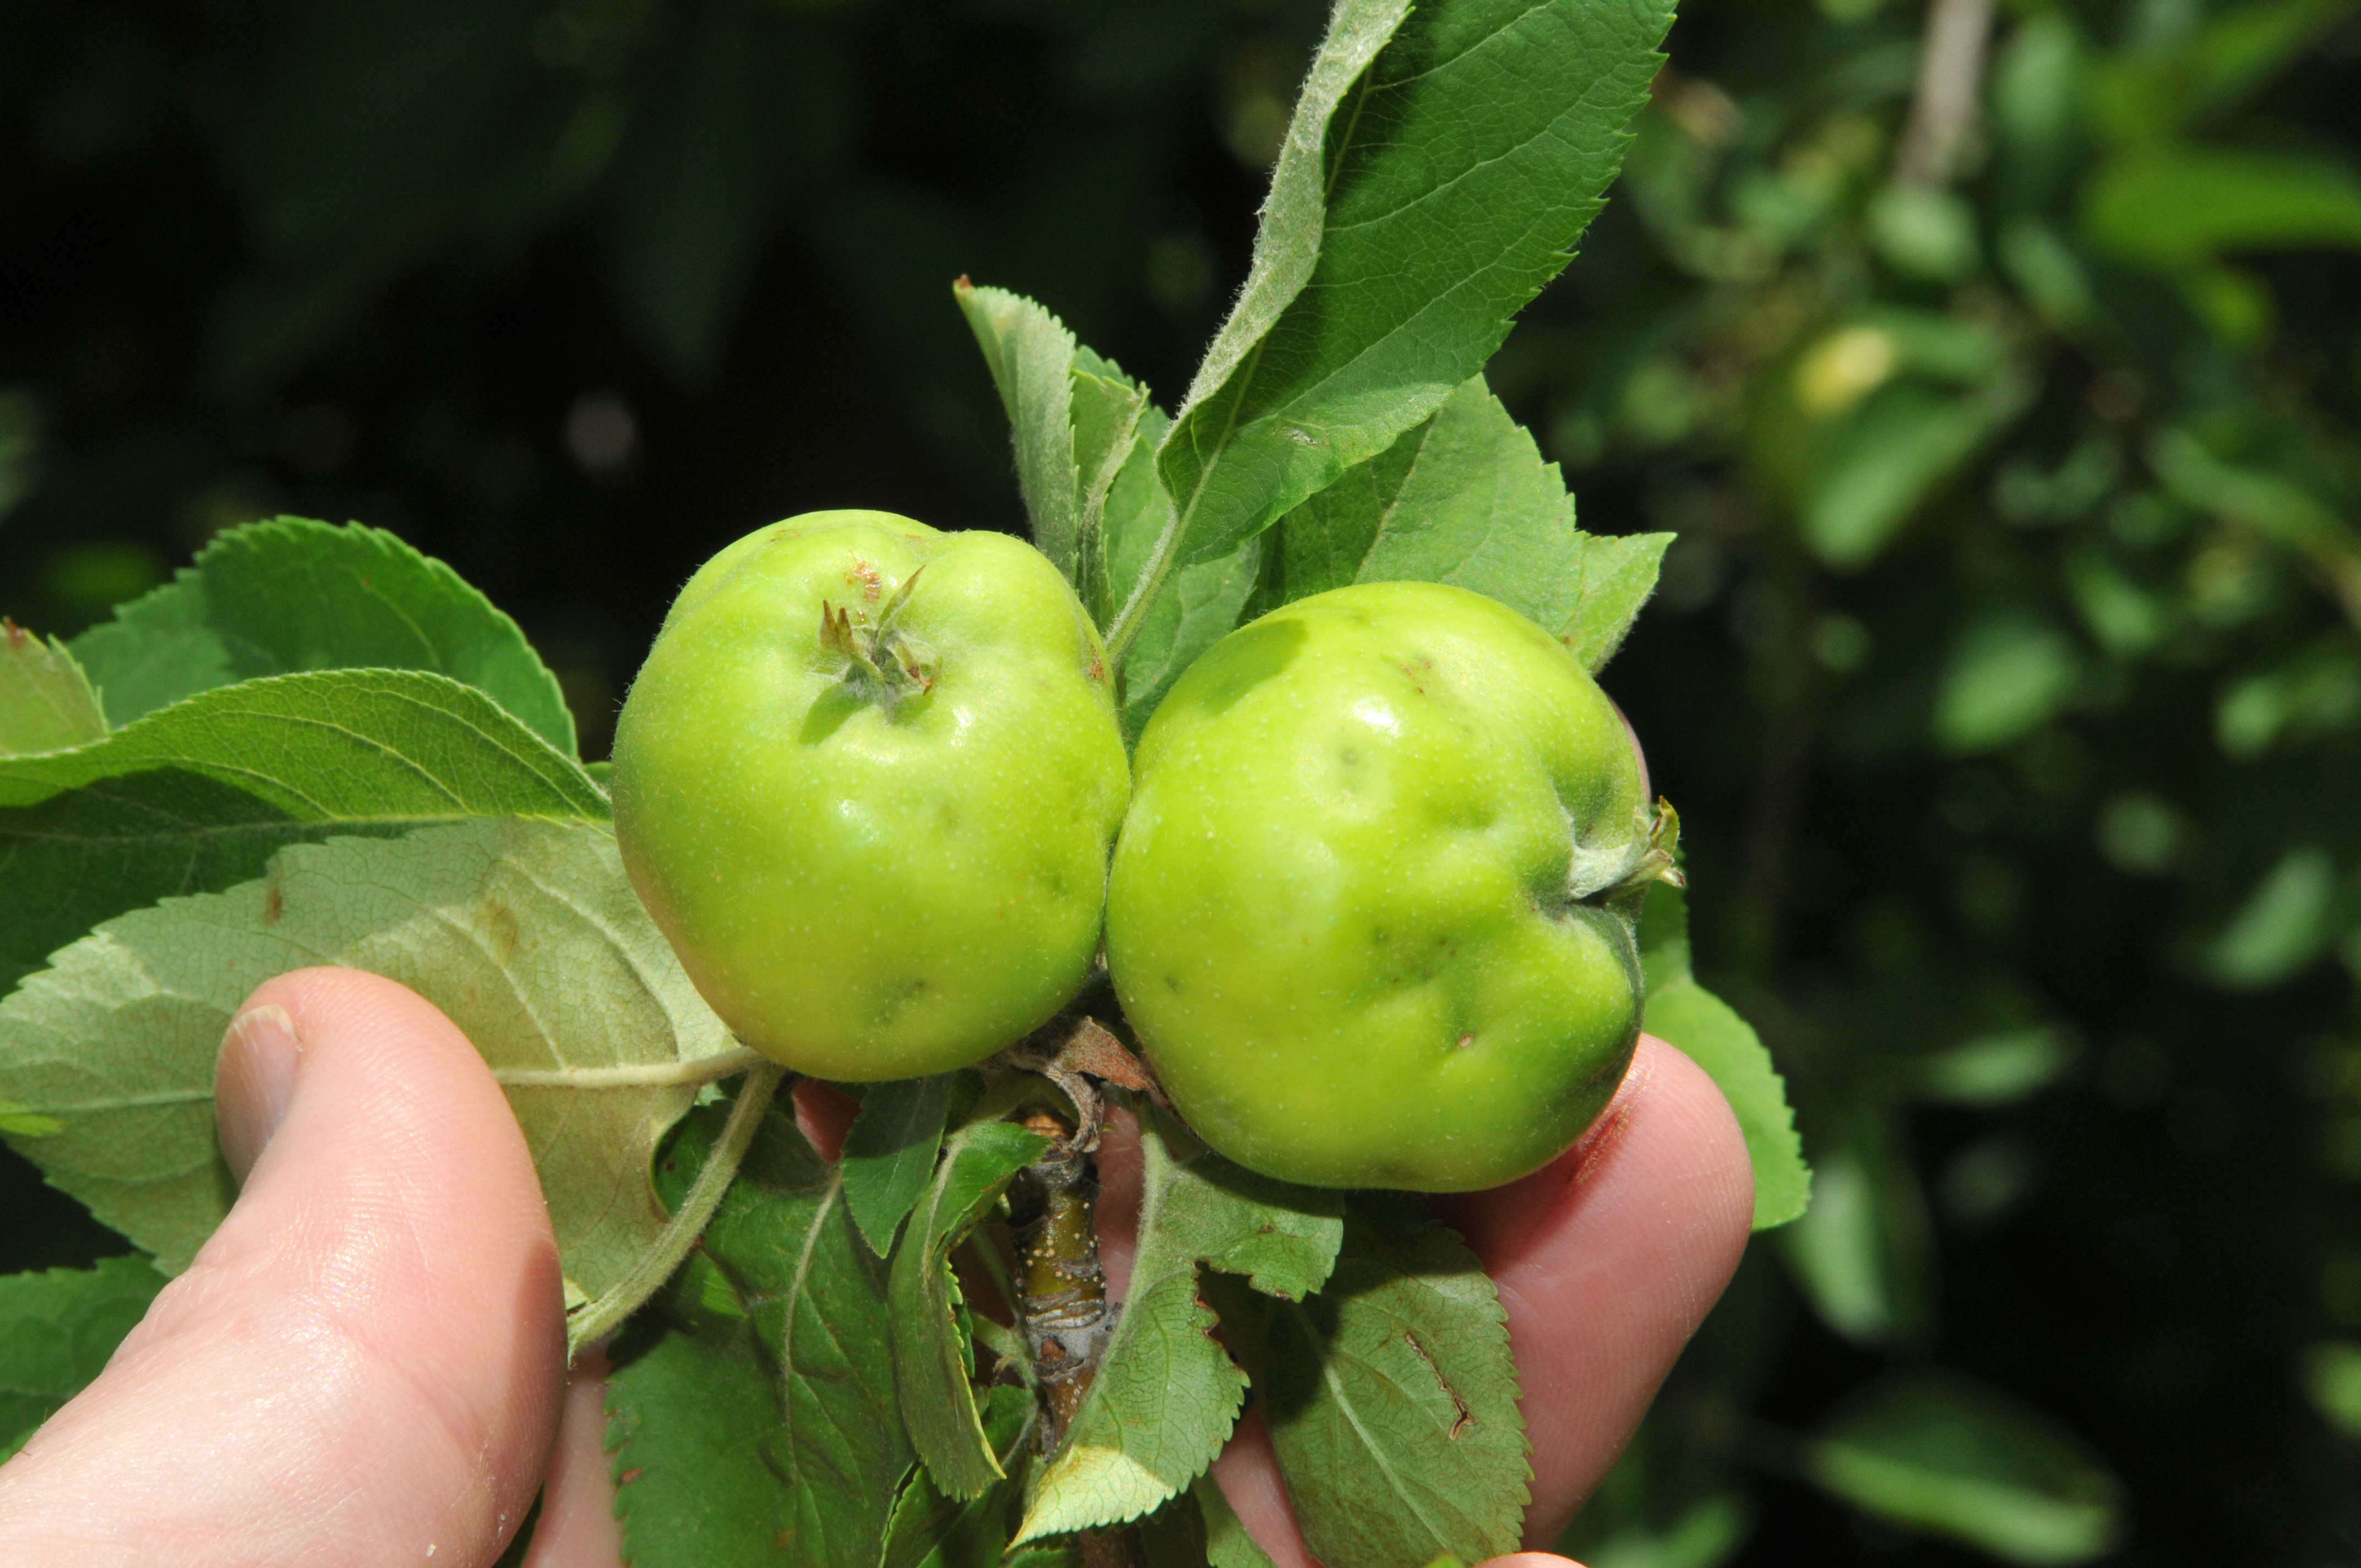 Figure 23. Small depressions on the surface of immature apples caused by brown marmorated stink bug feeding. (<em>Photo credit: John Obermeyer, Purdue Entomology</em>)